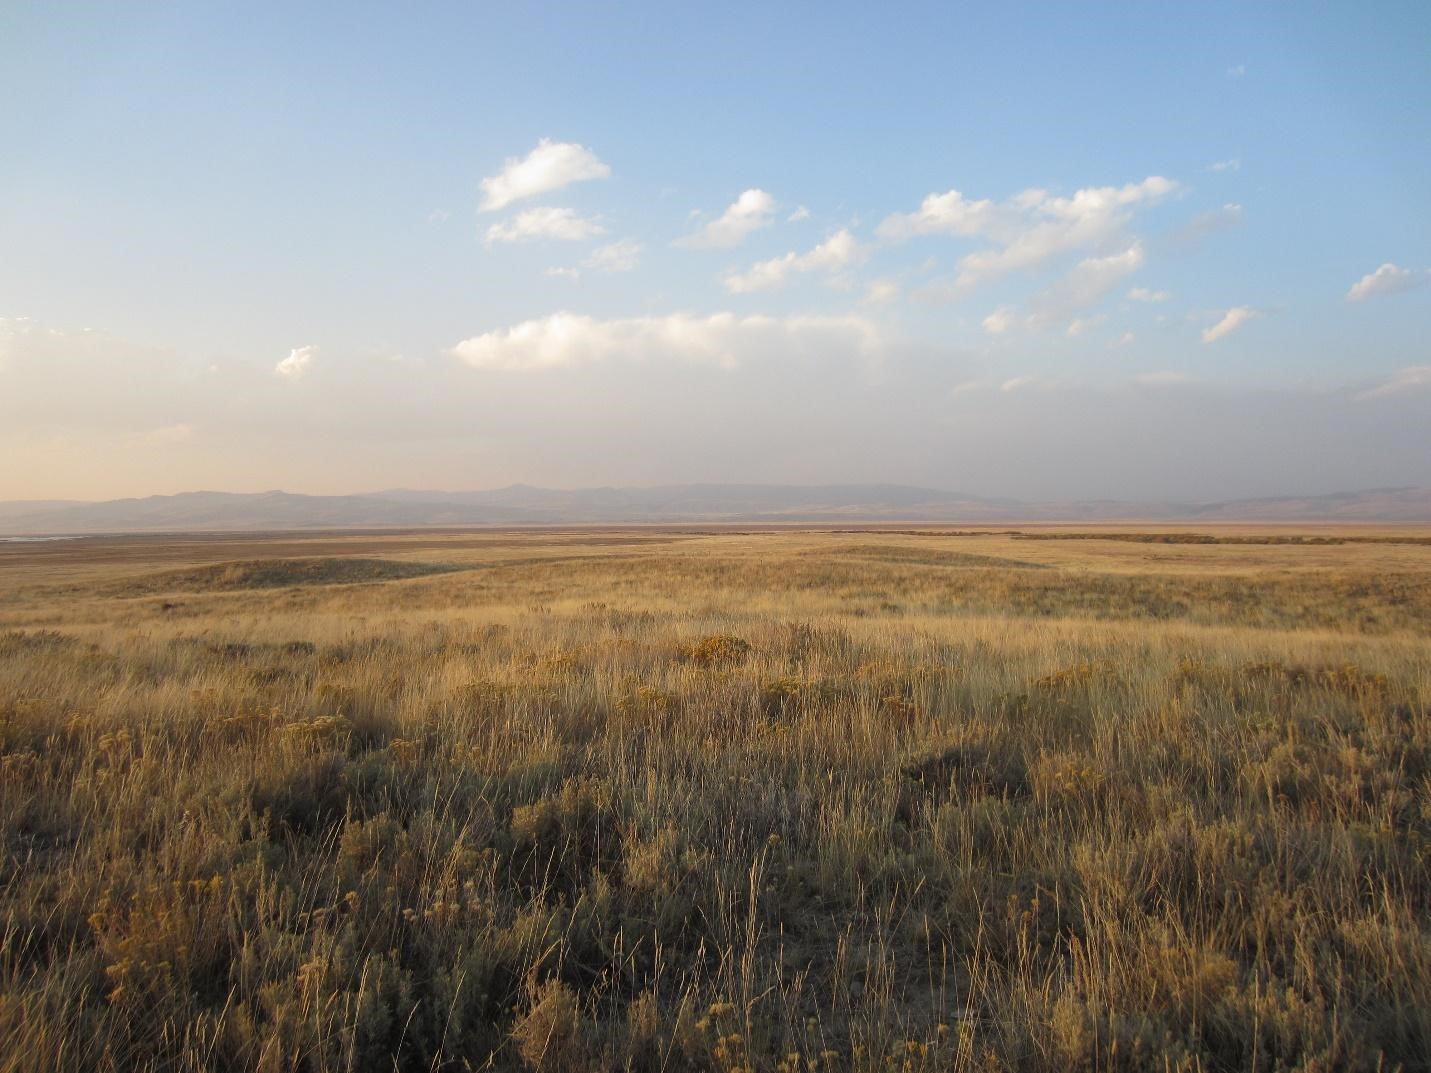 Rangeland extending out to the horizon at sunset in Fall with foothills in the distance